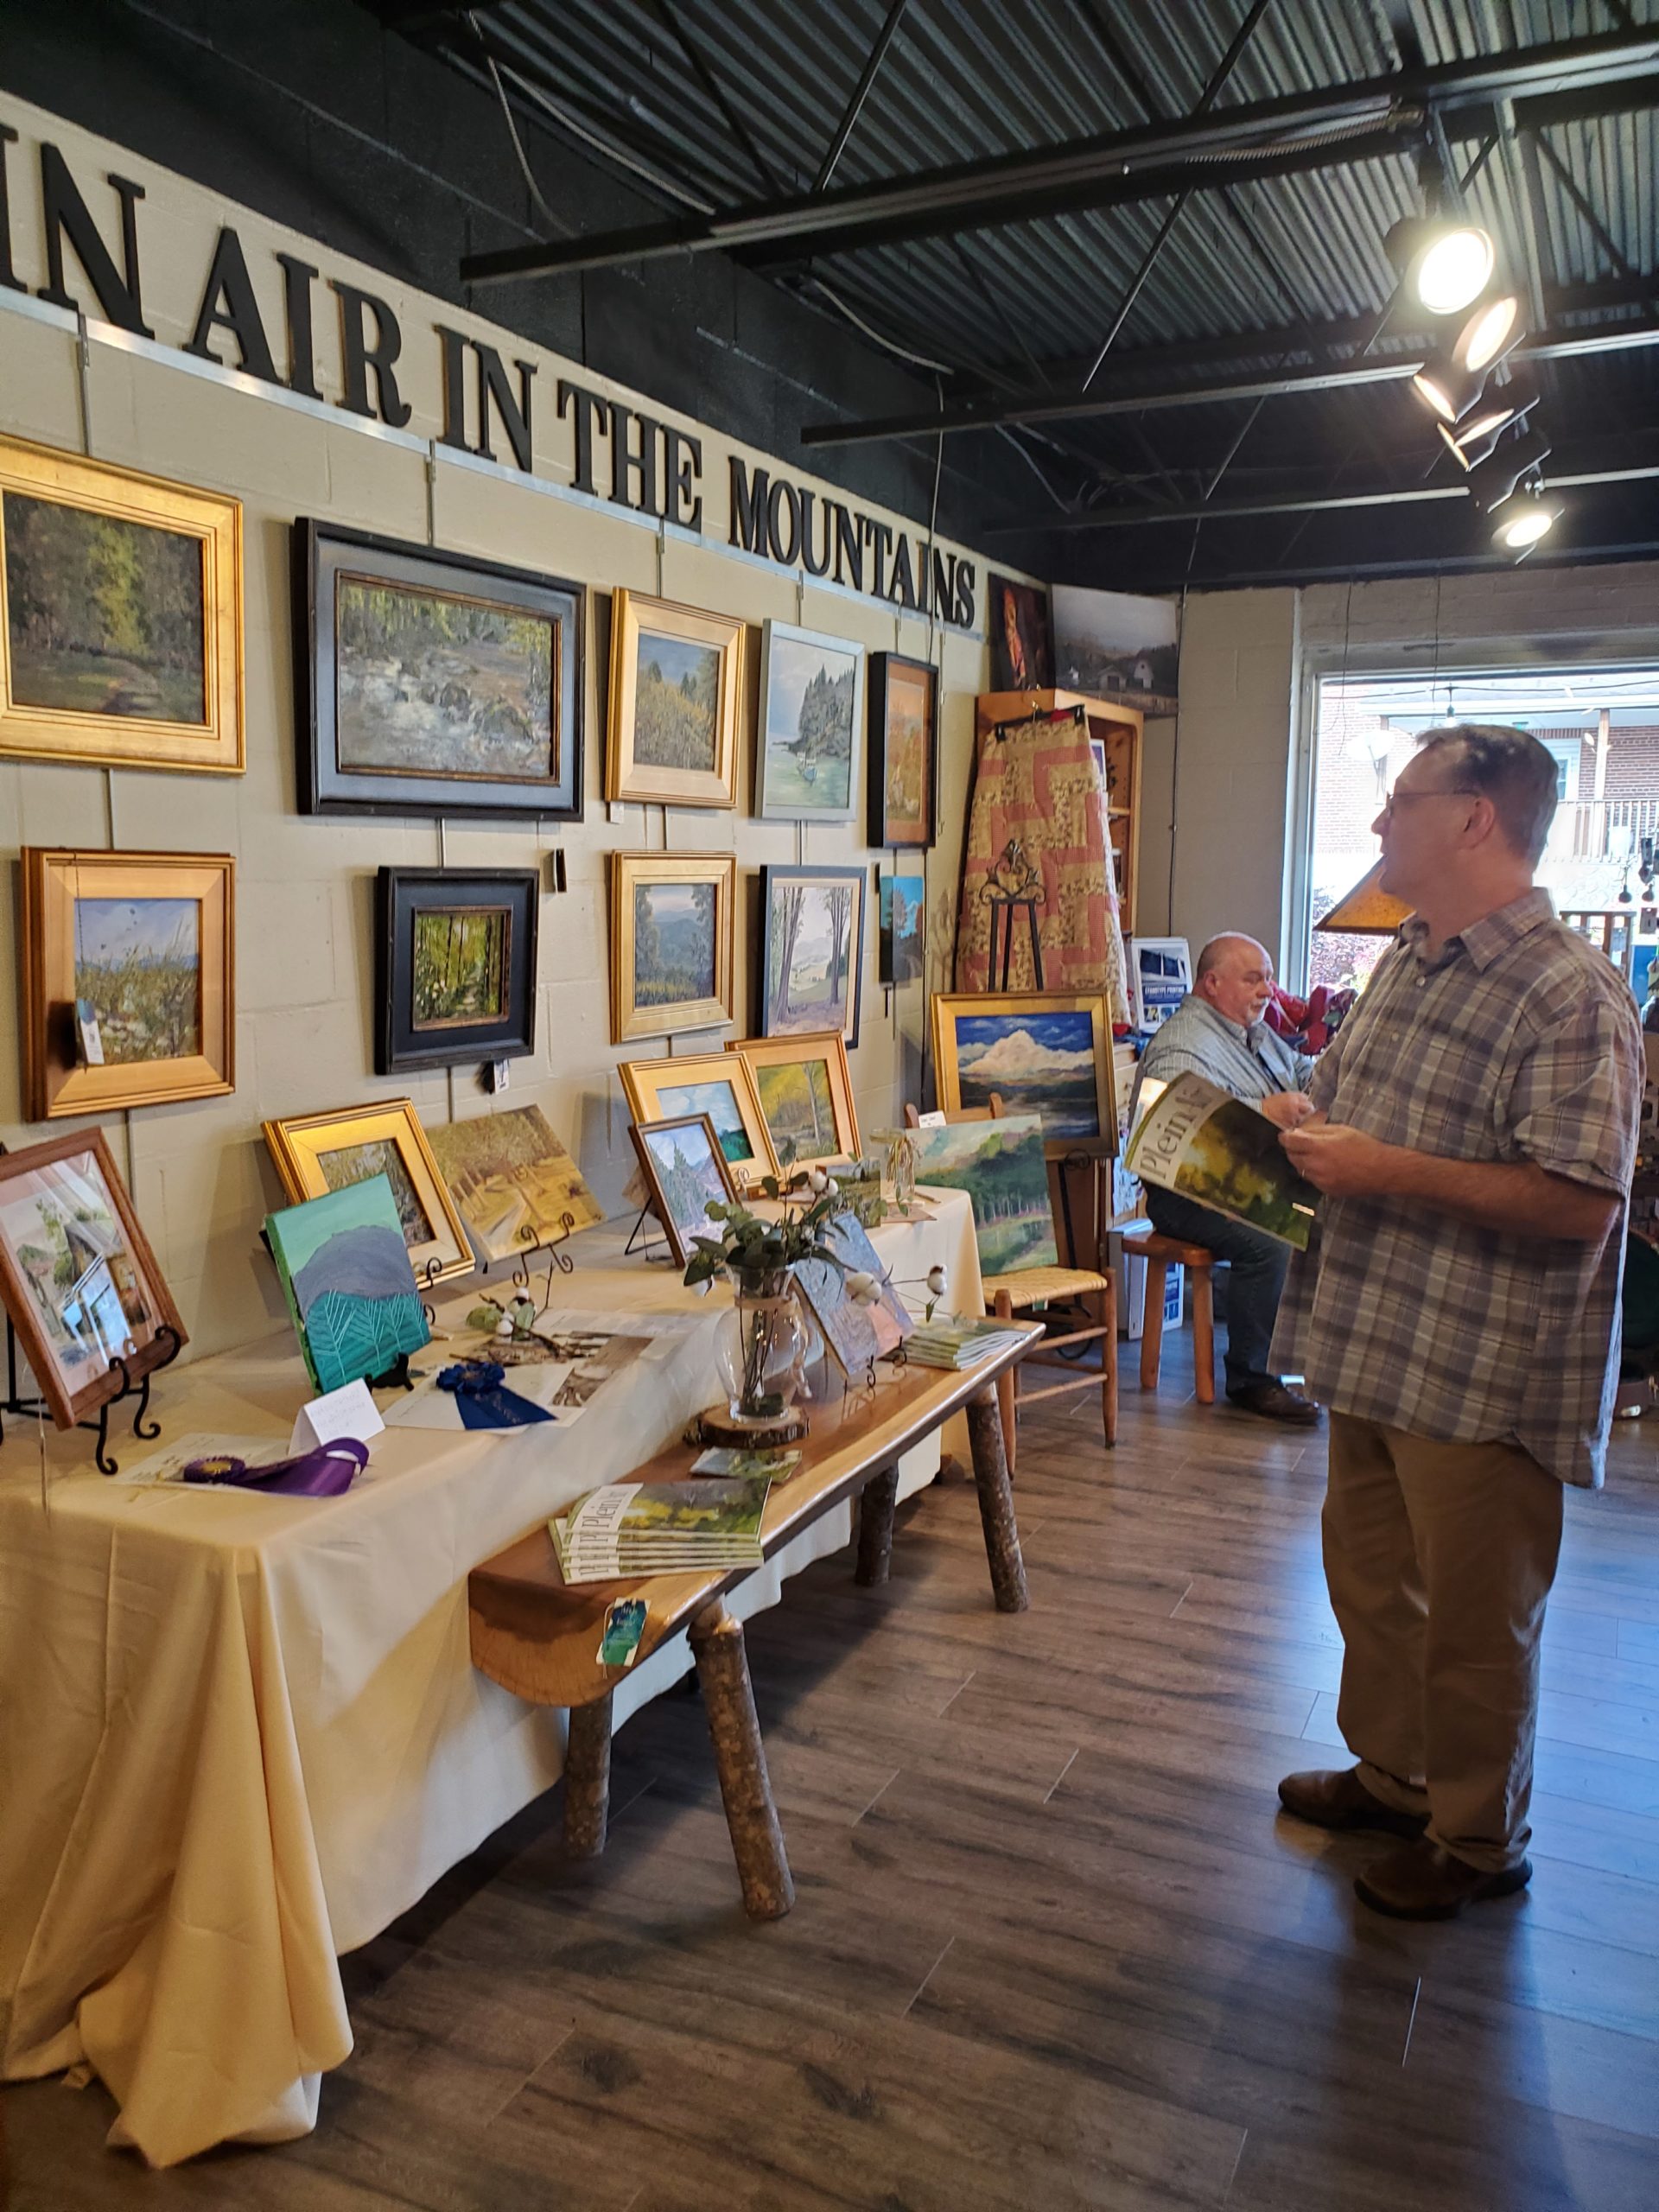 From the Plein Air in the Mountains Show 